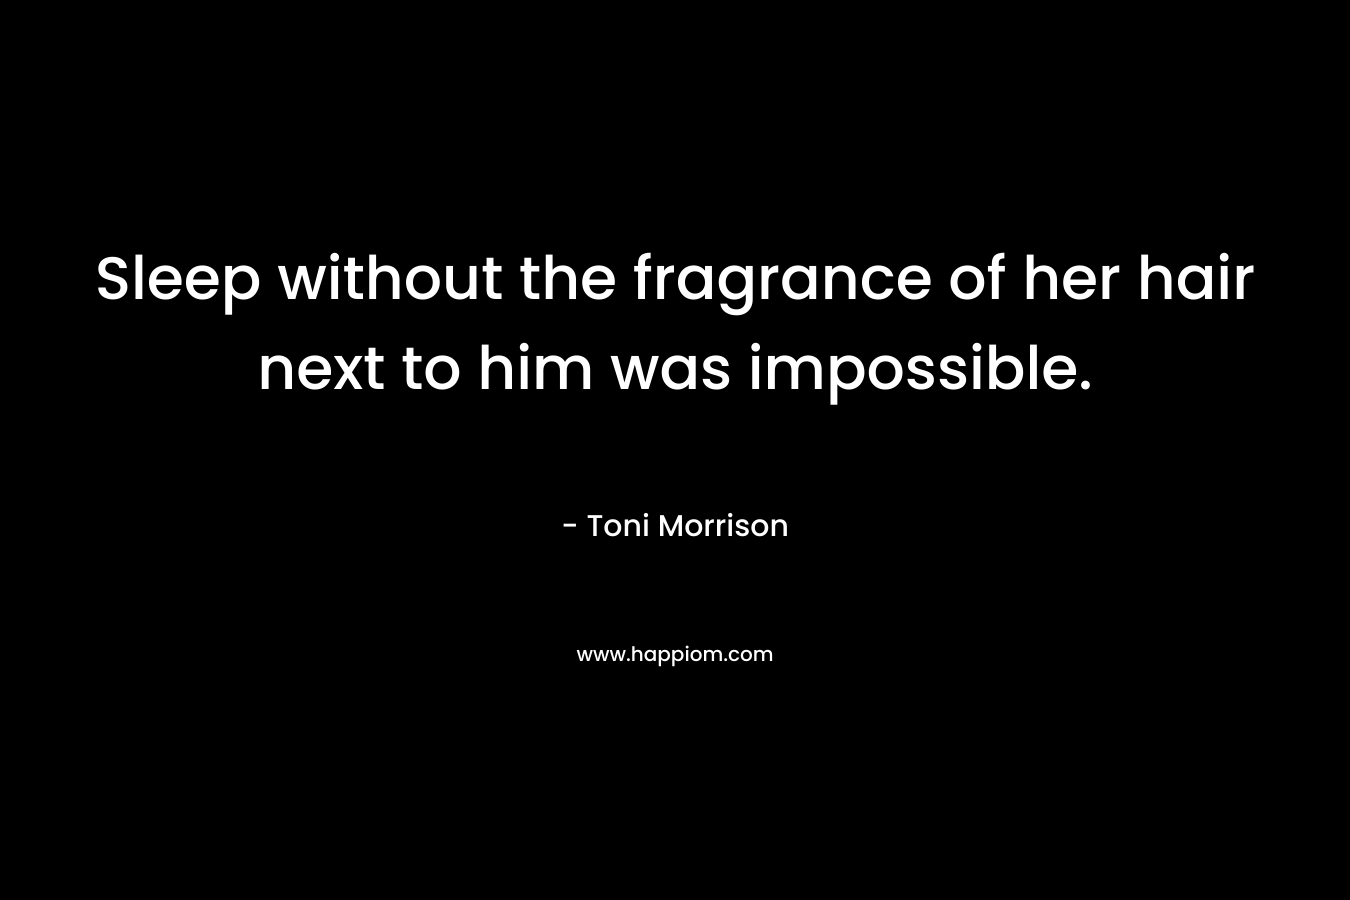 Sleep without the fragrance of her hair next to him was impossible. – Toni Morrison